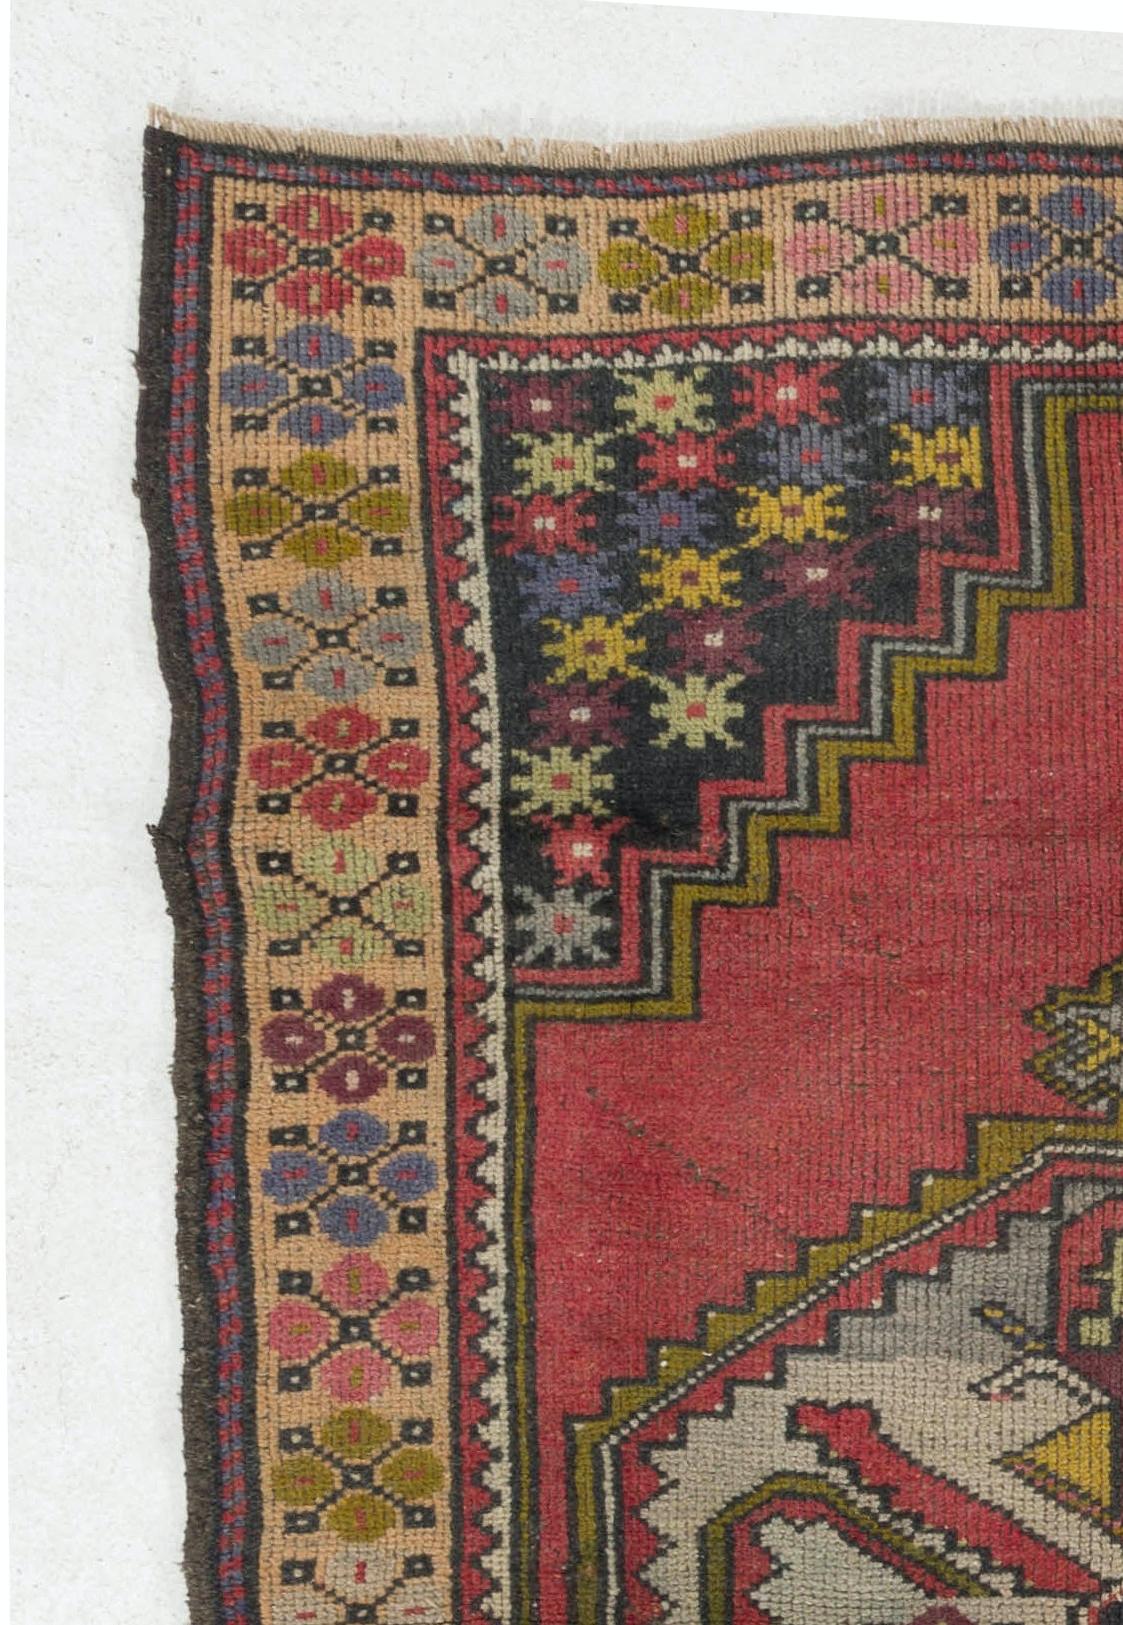 A finely hand-knotted vintage Turkish carpet from 1950s featuring a well-drawn geometric design with a medallion at its center. The rug is made of medium wool pile on wool foundation. It is heavy and lays flat on the floor, in very good condition